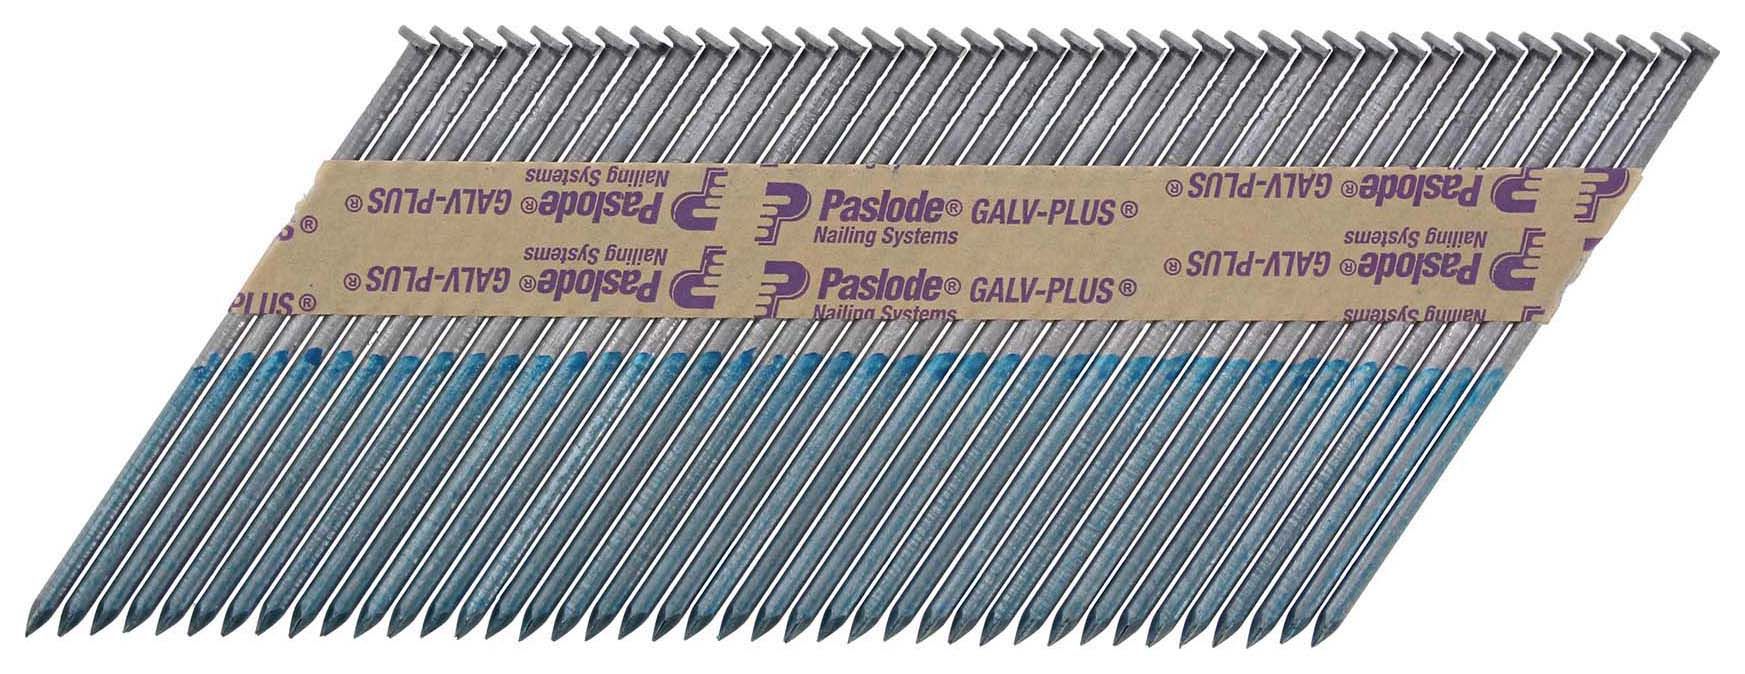 Paslode 360Xi 3.1mm x 90mm Galv-Plus Collated Nails + 1 Fuel Cell - Box of 1100